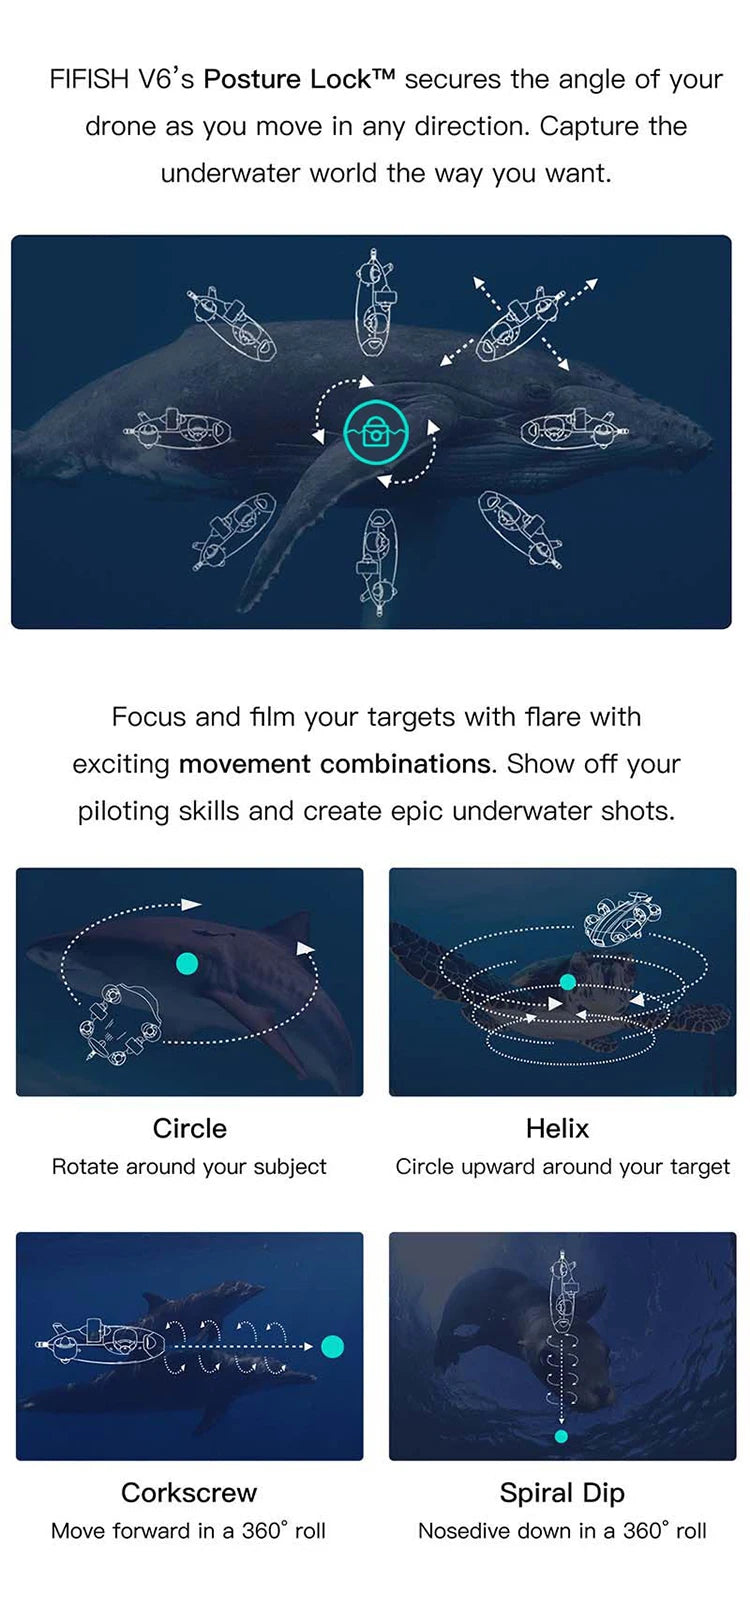 Fifish V6 - professional Underwater Drone, Fifish V6, FIFISH V6' s Posture LockTM secures the angle of your drone